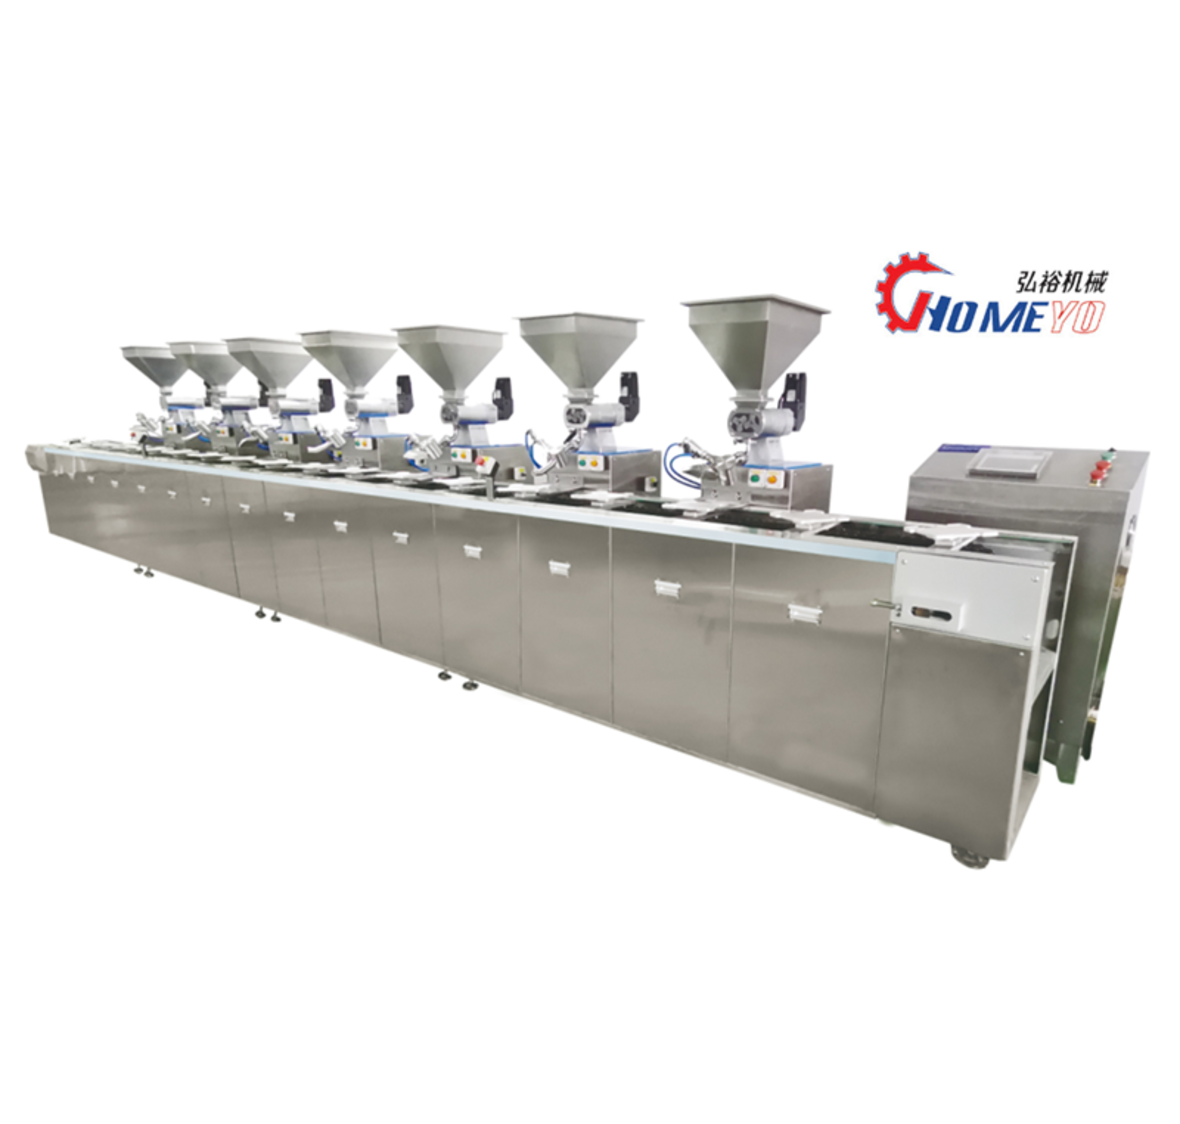 Durian crepe cake production line Non-standard customization